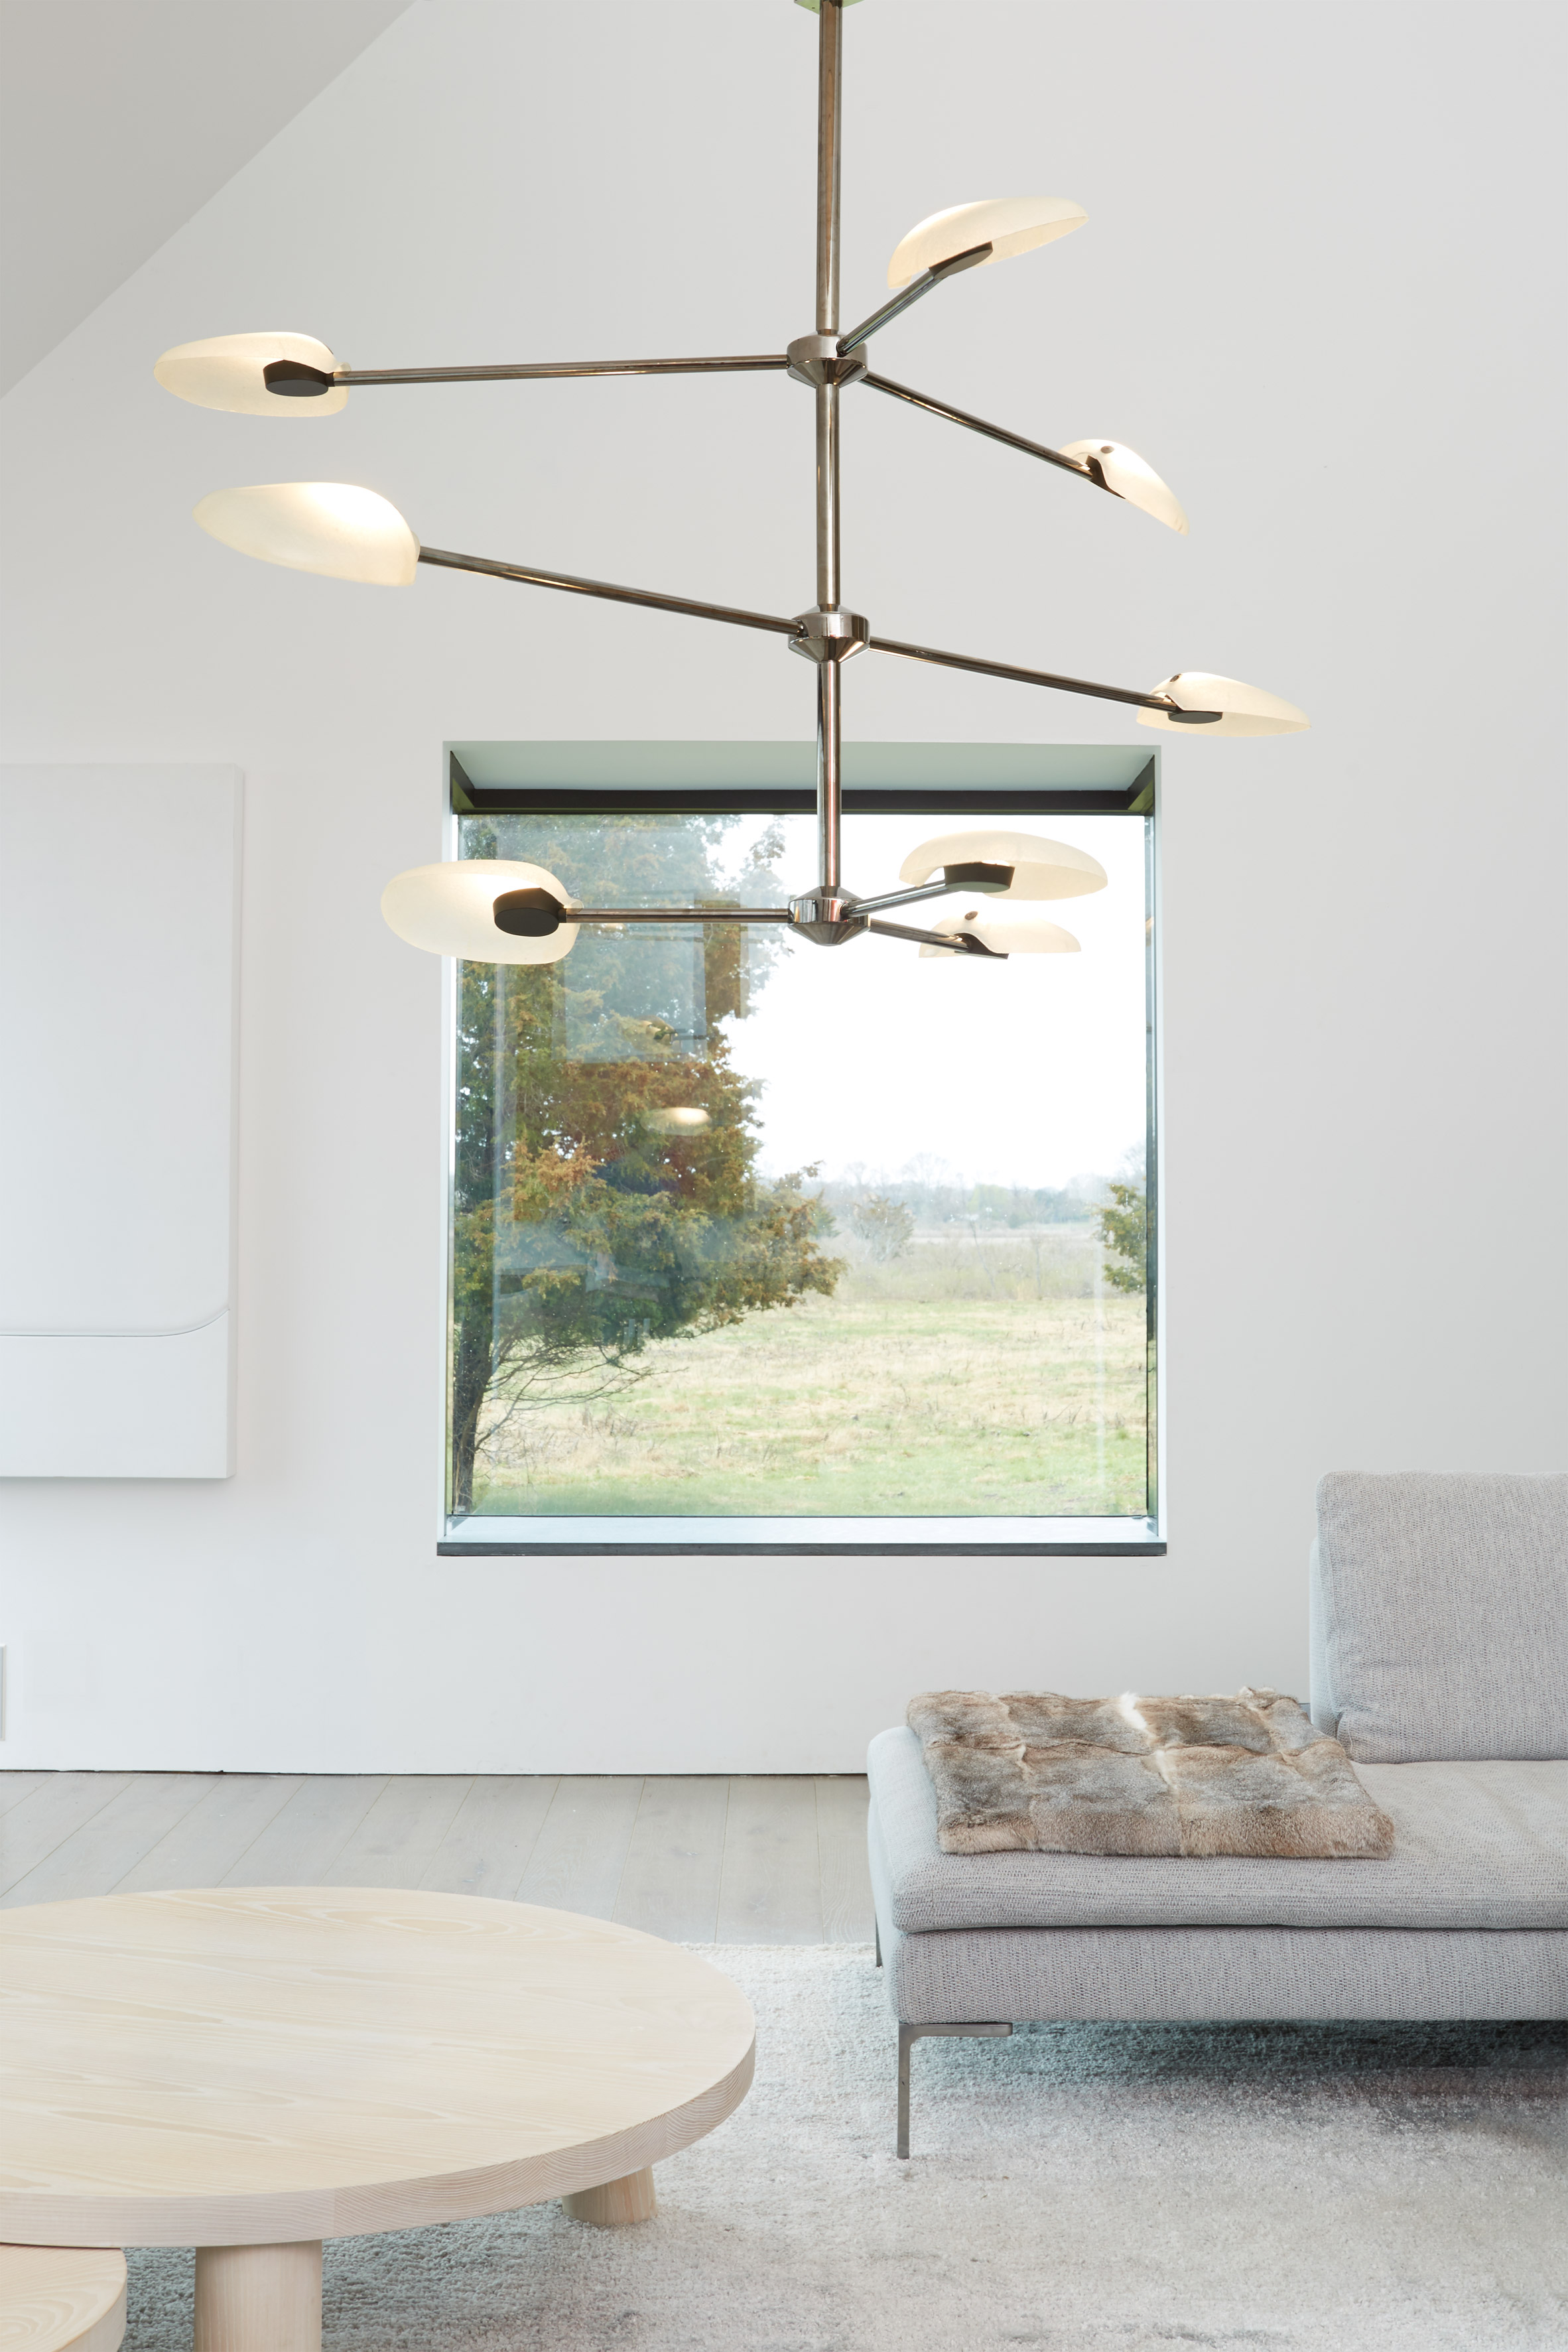 Rich Brilliant Willing launches modernist-style chandelier and pendants on hoists